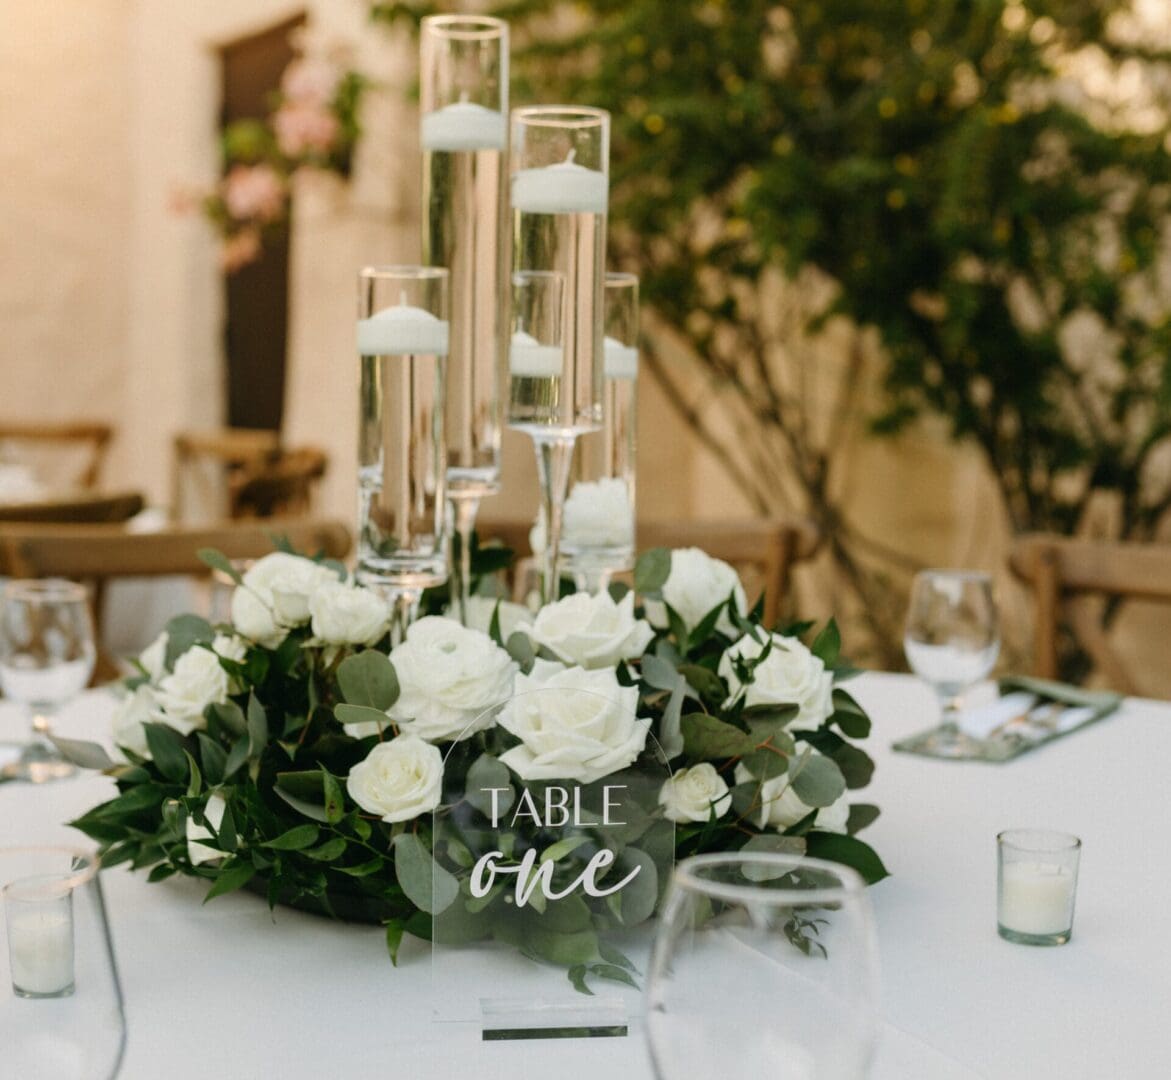 A table with white flowers and candles on it